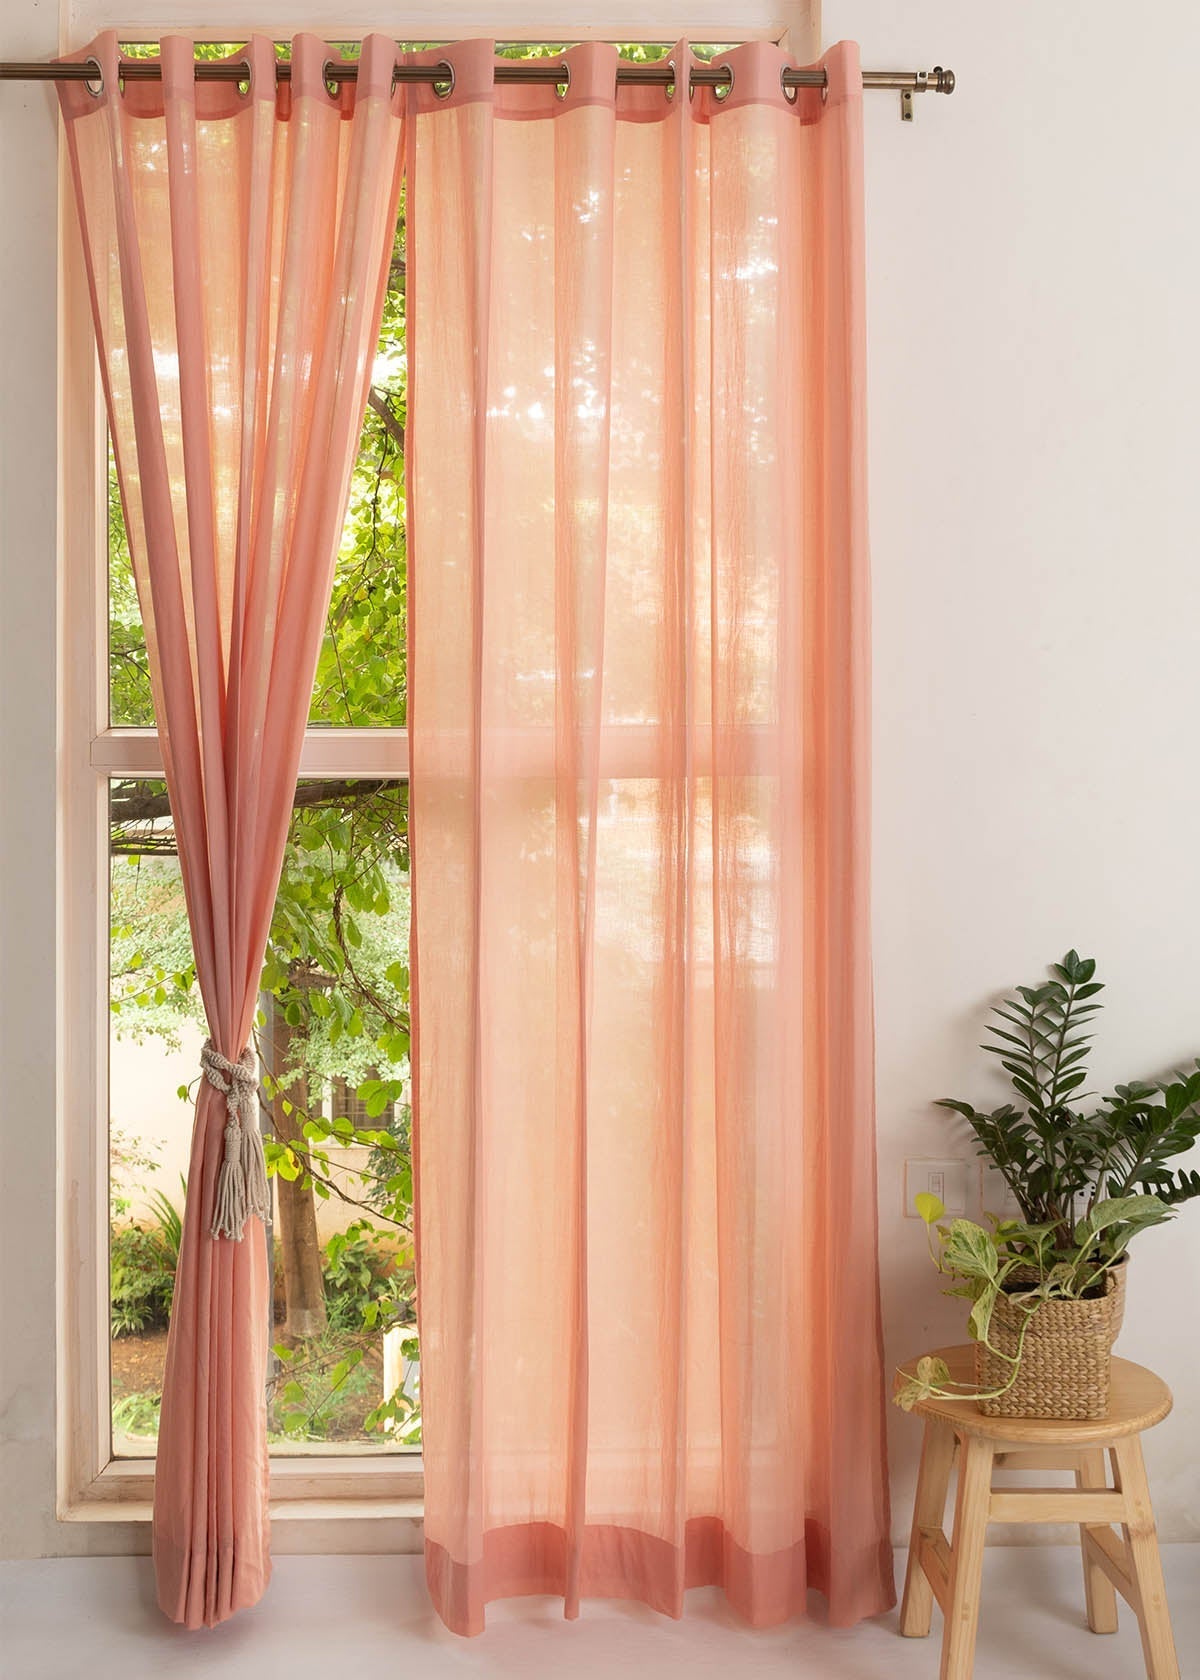 Solid Clay sheer 100% cotton plain curtain for Living room & bedroom - Light filtering - Rust - Pack of 1